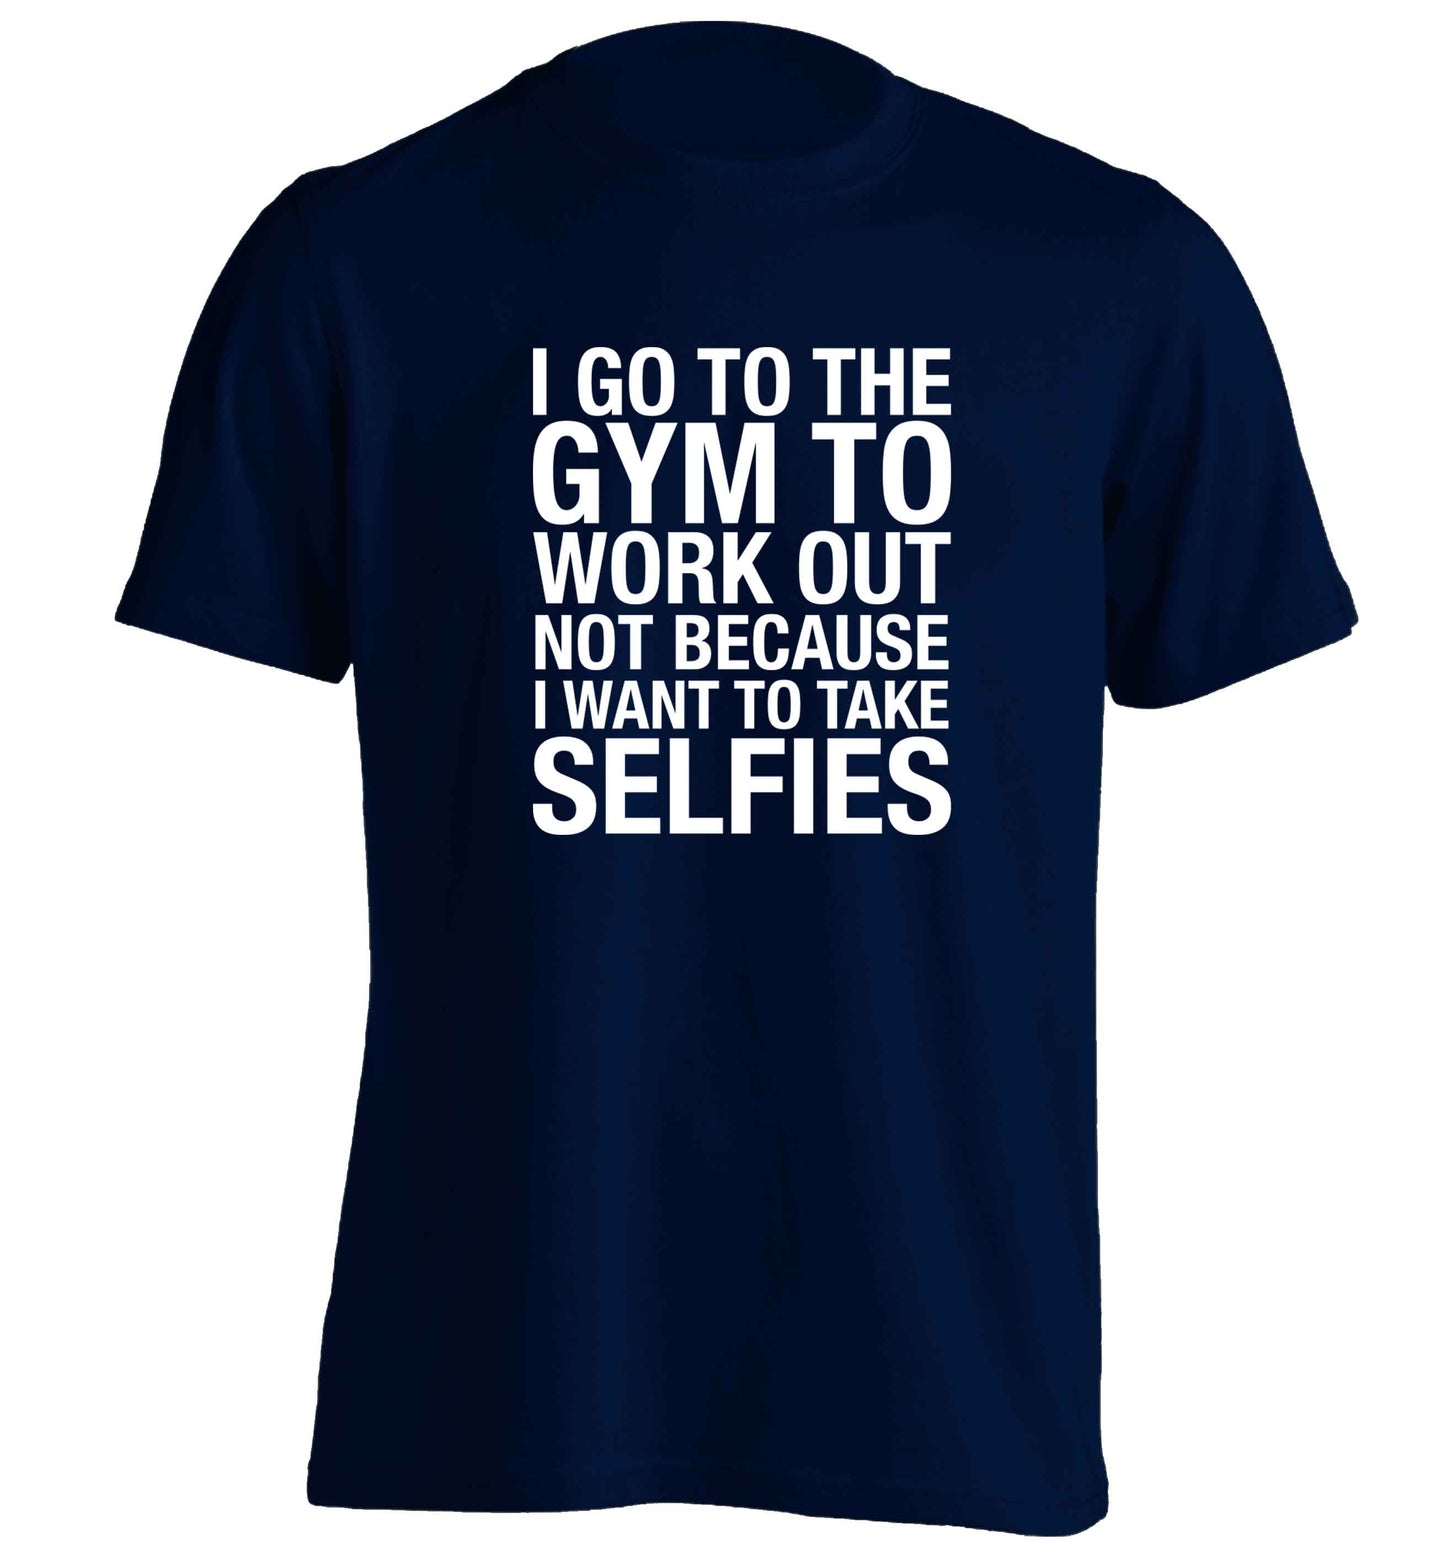 I go to the gym to workout not to take selfies adults unisex navy Tshirt 2XL